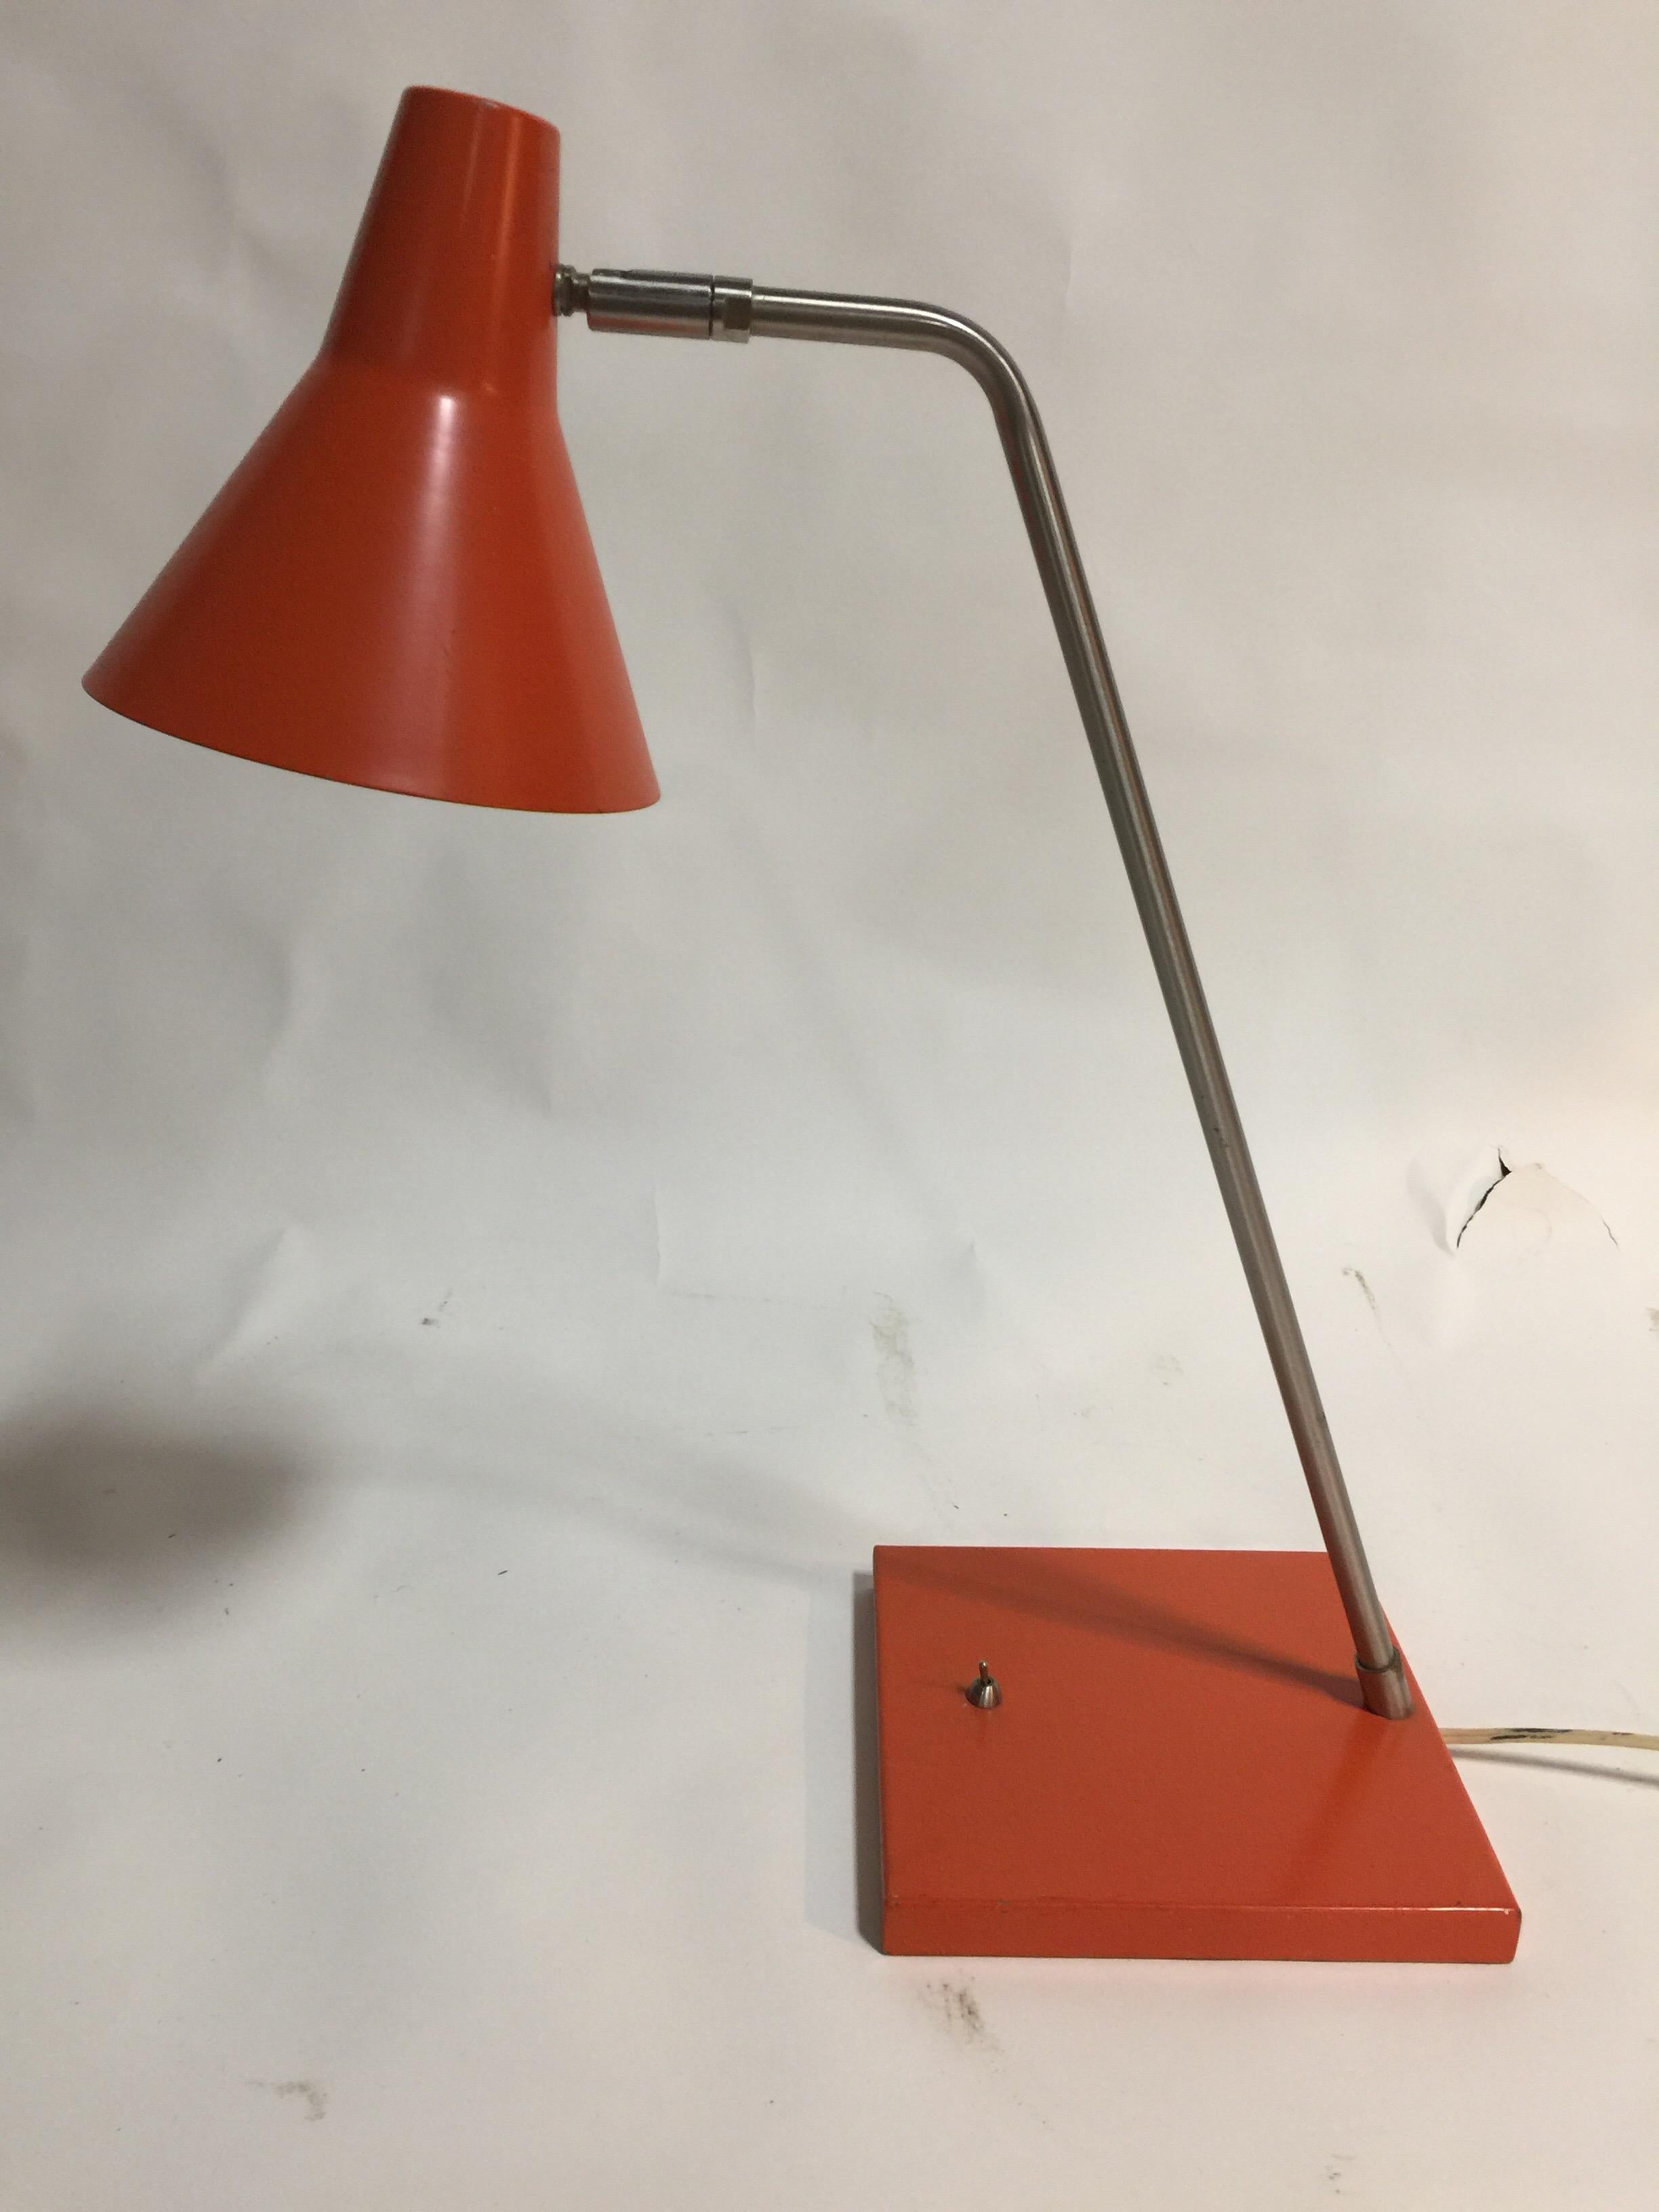 A contemporary orange metal desk lamp. Features a movable chrome arm with orange shade and base. Imported, circa 2000.

Dimensions: 21 inches H x 8 inch base diameter x 6.5 inch shade W.
   